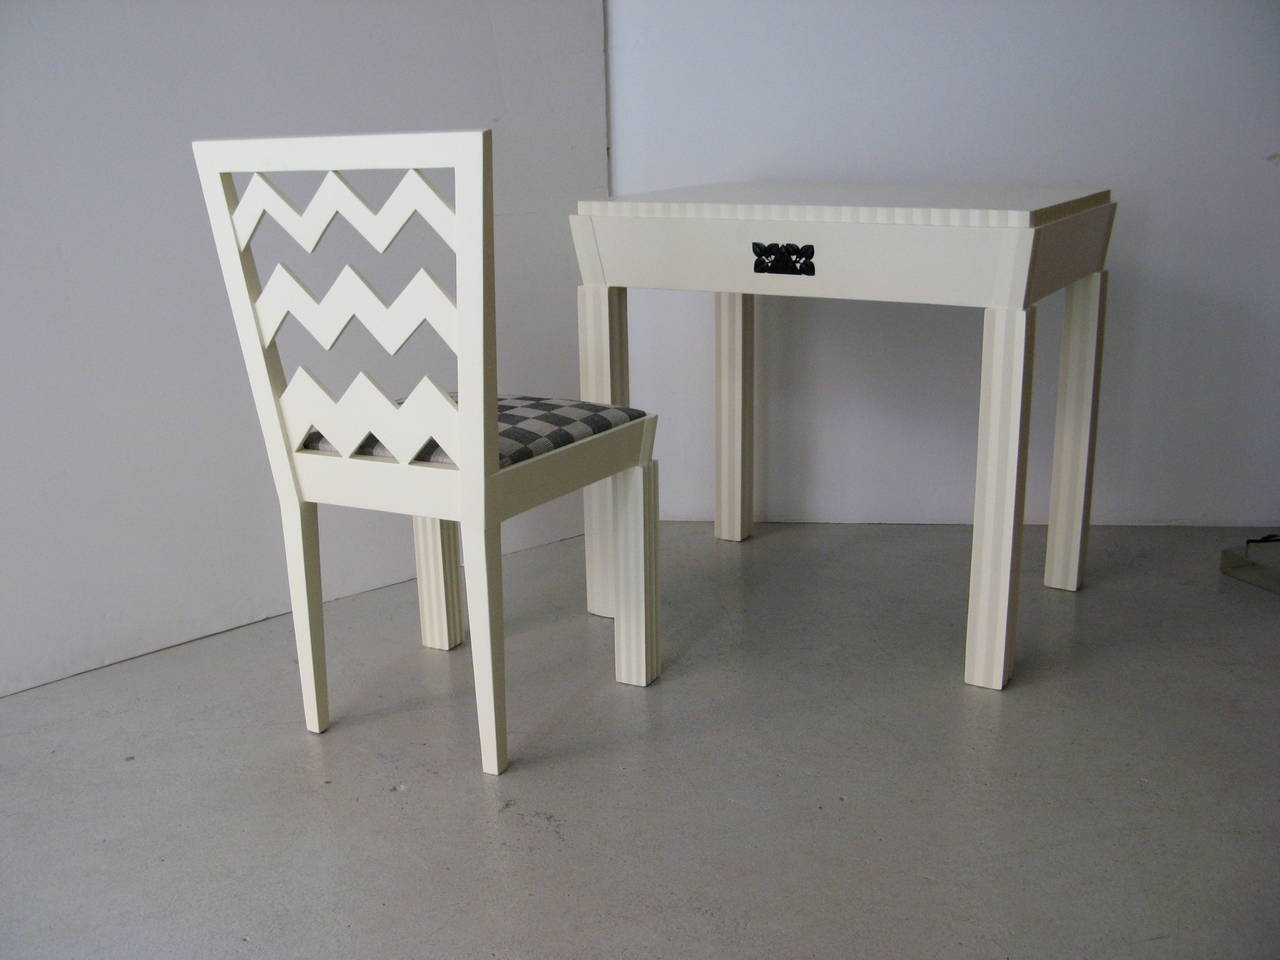 Early 20th Century Josef Hoffmann Attributed Vienna Secession White Lacquered Desk, circa 1910 For Sale